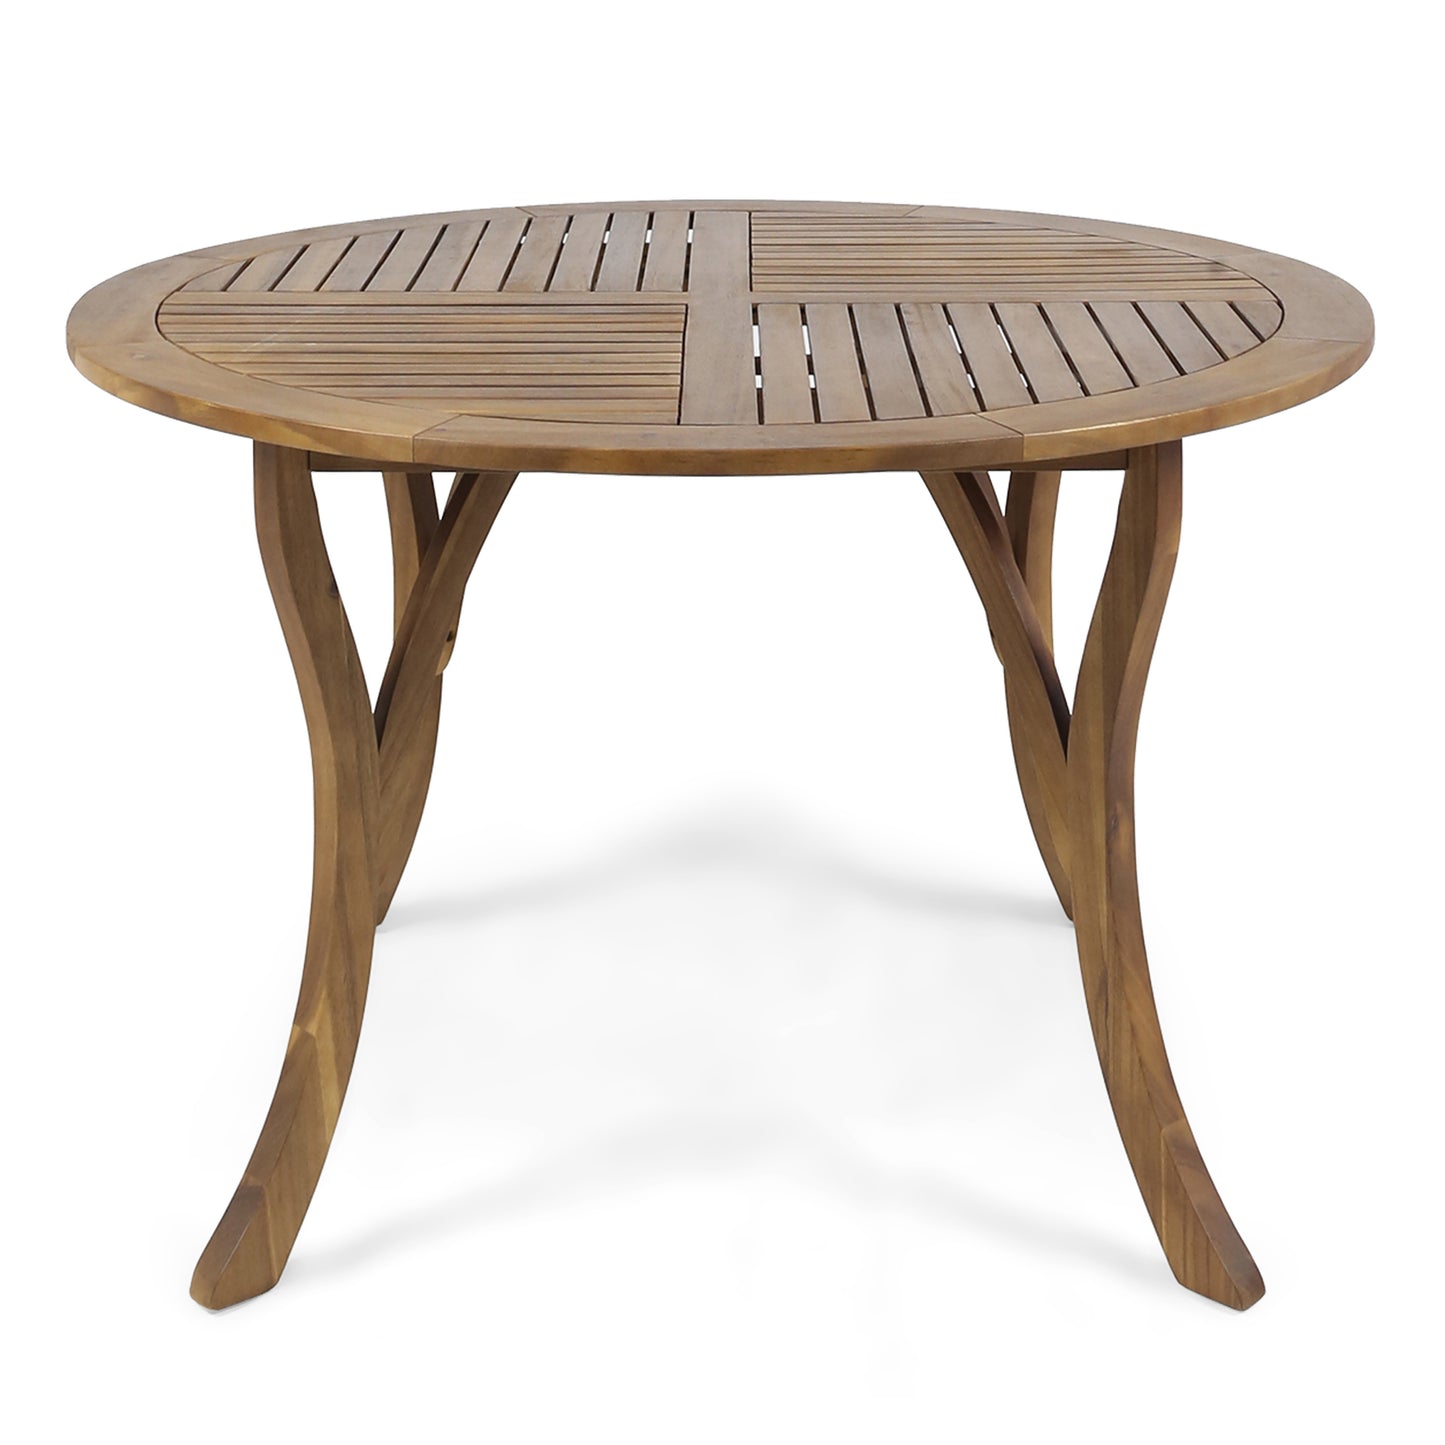 Adn Outdoor 47-inch Round Acacia Wood Dining Table